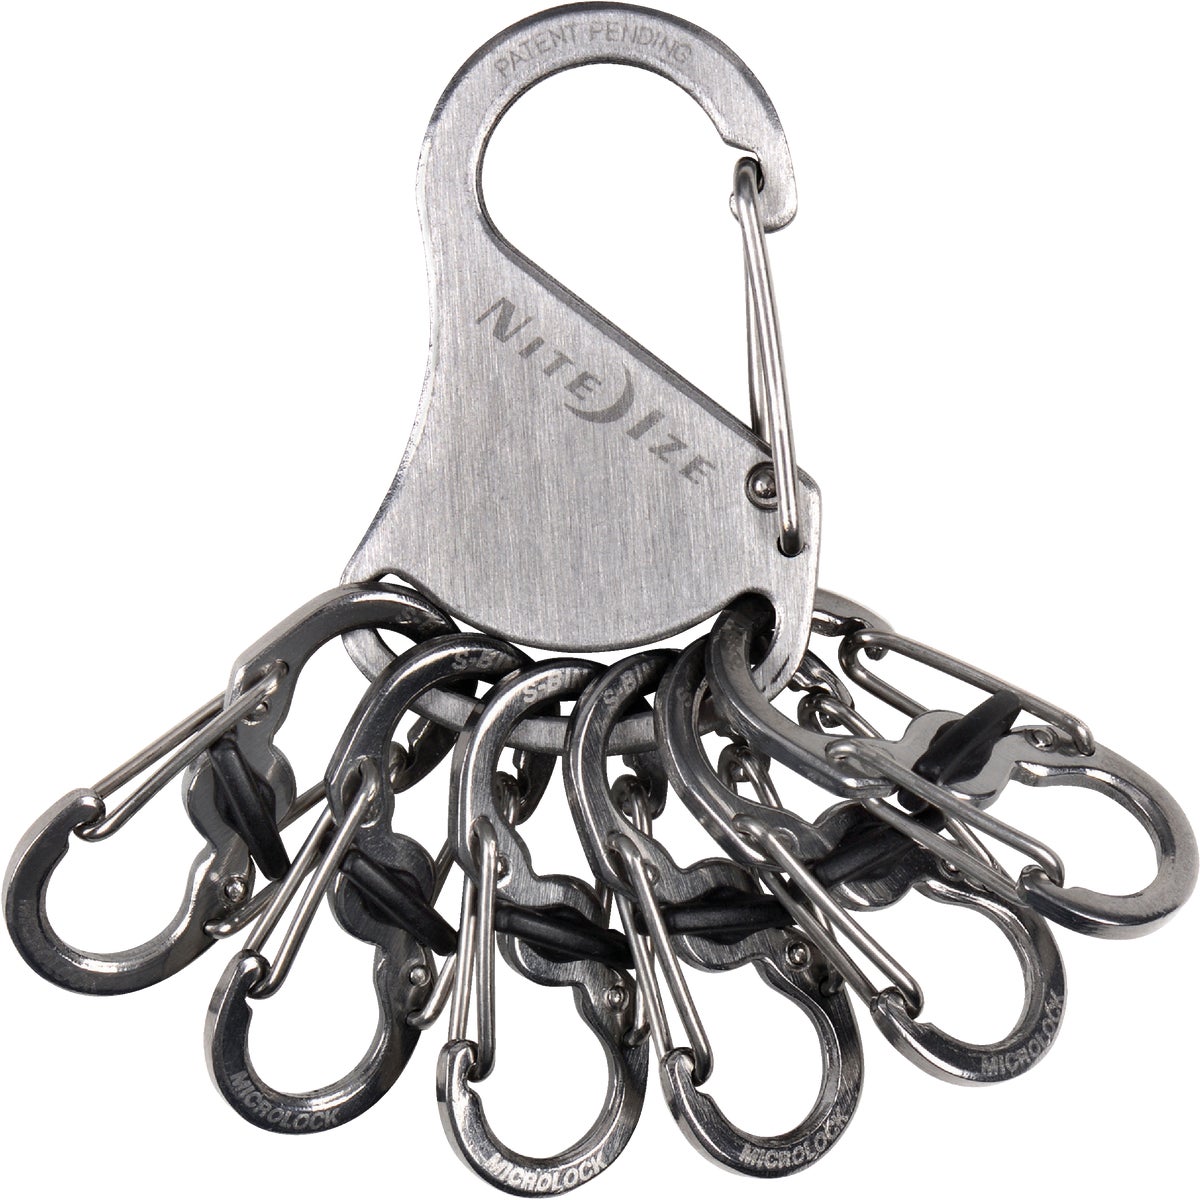 Item 570372, KeyRack Locker features sturdy, secure carabiner gate closure for clipping 